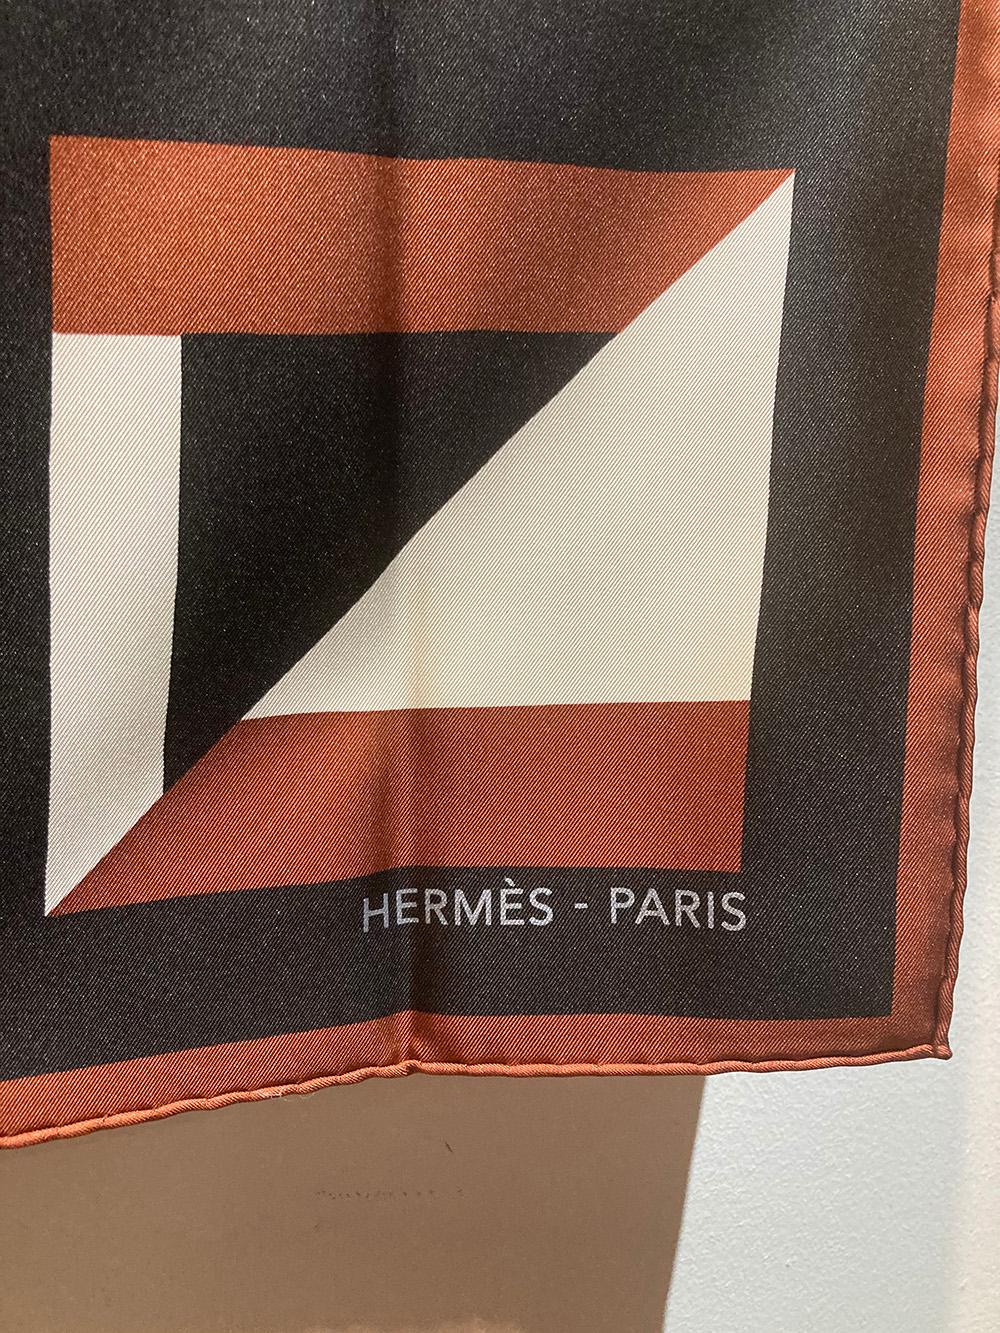 Hermes Lettres au Carre Scarf in brown, cream and black silk in excellent condition. New with tag. No stains smells or fabric pulls. Measurements: 35x35